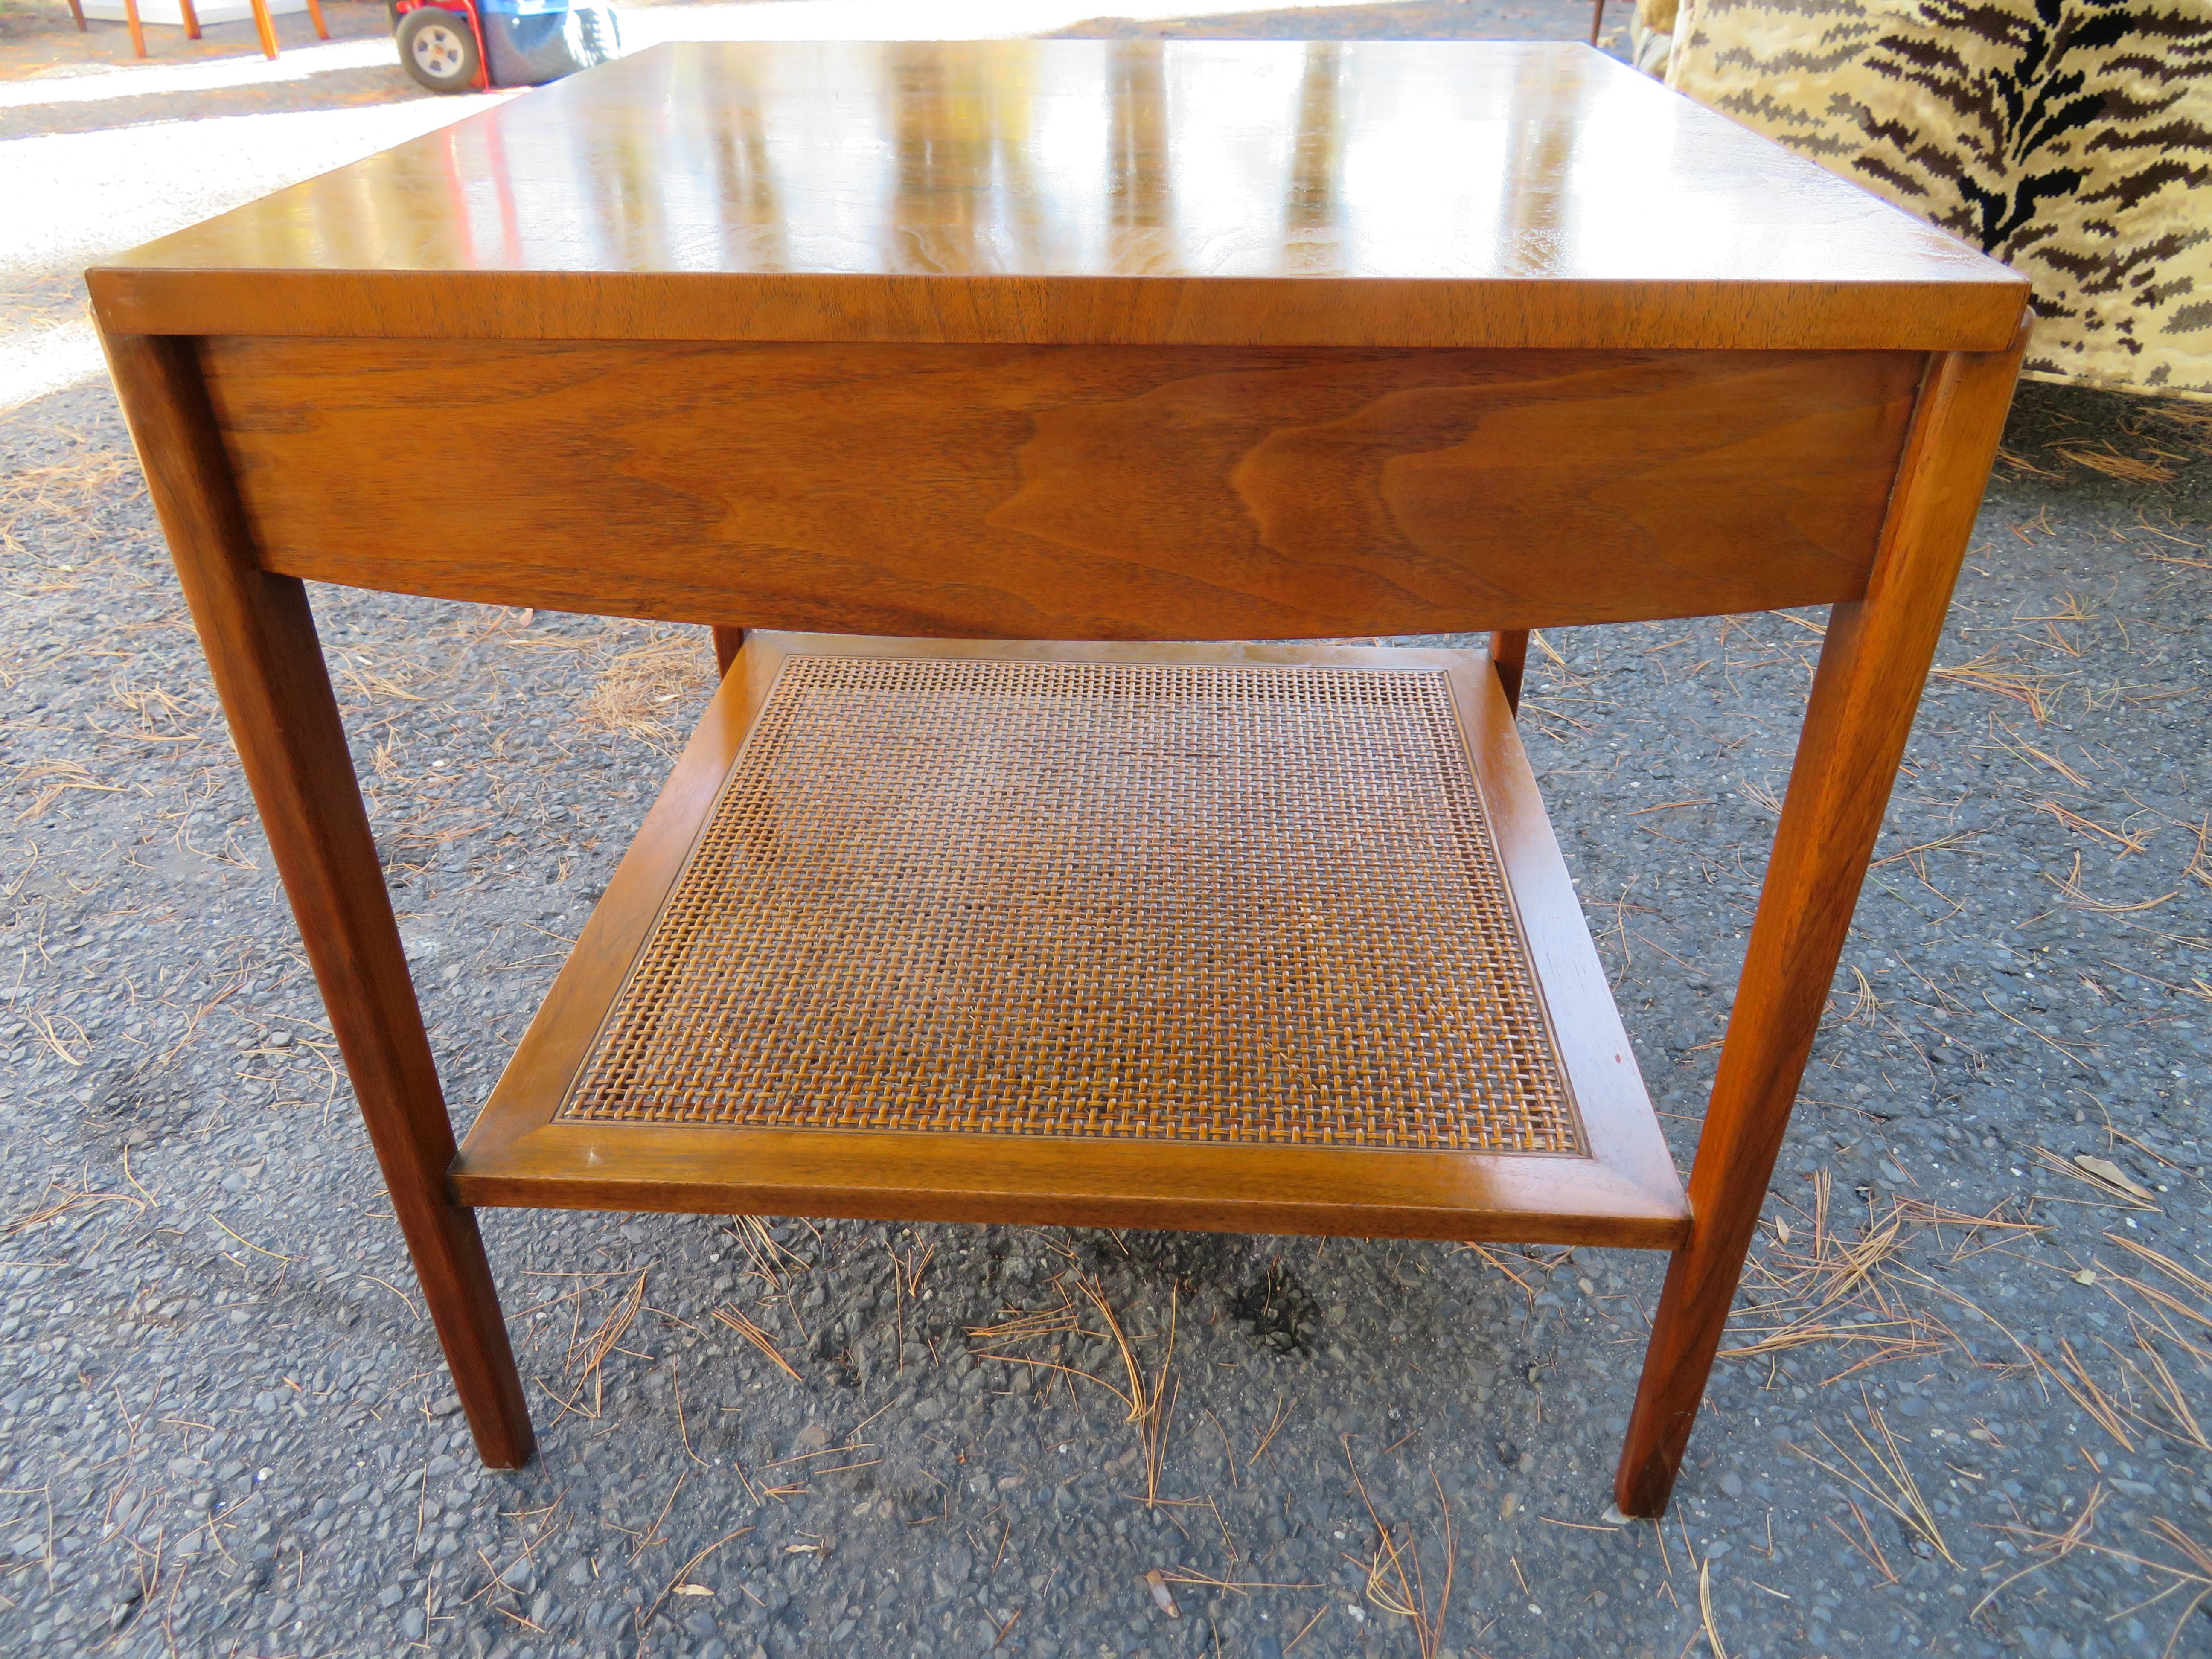 Lovely Widdicomb Walnut & Cane Single Drawer End Table Mid-Century Modern For Sale 4